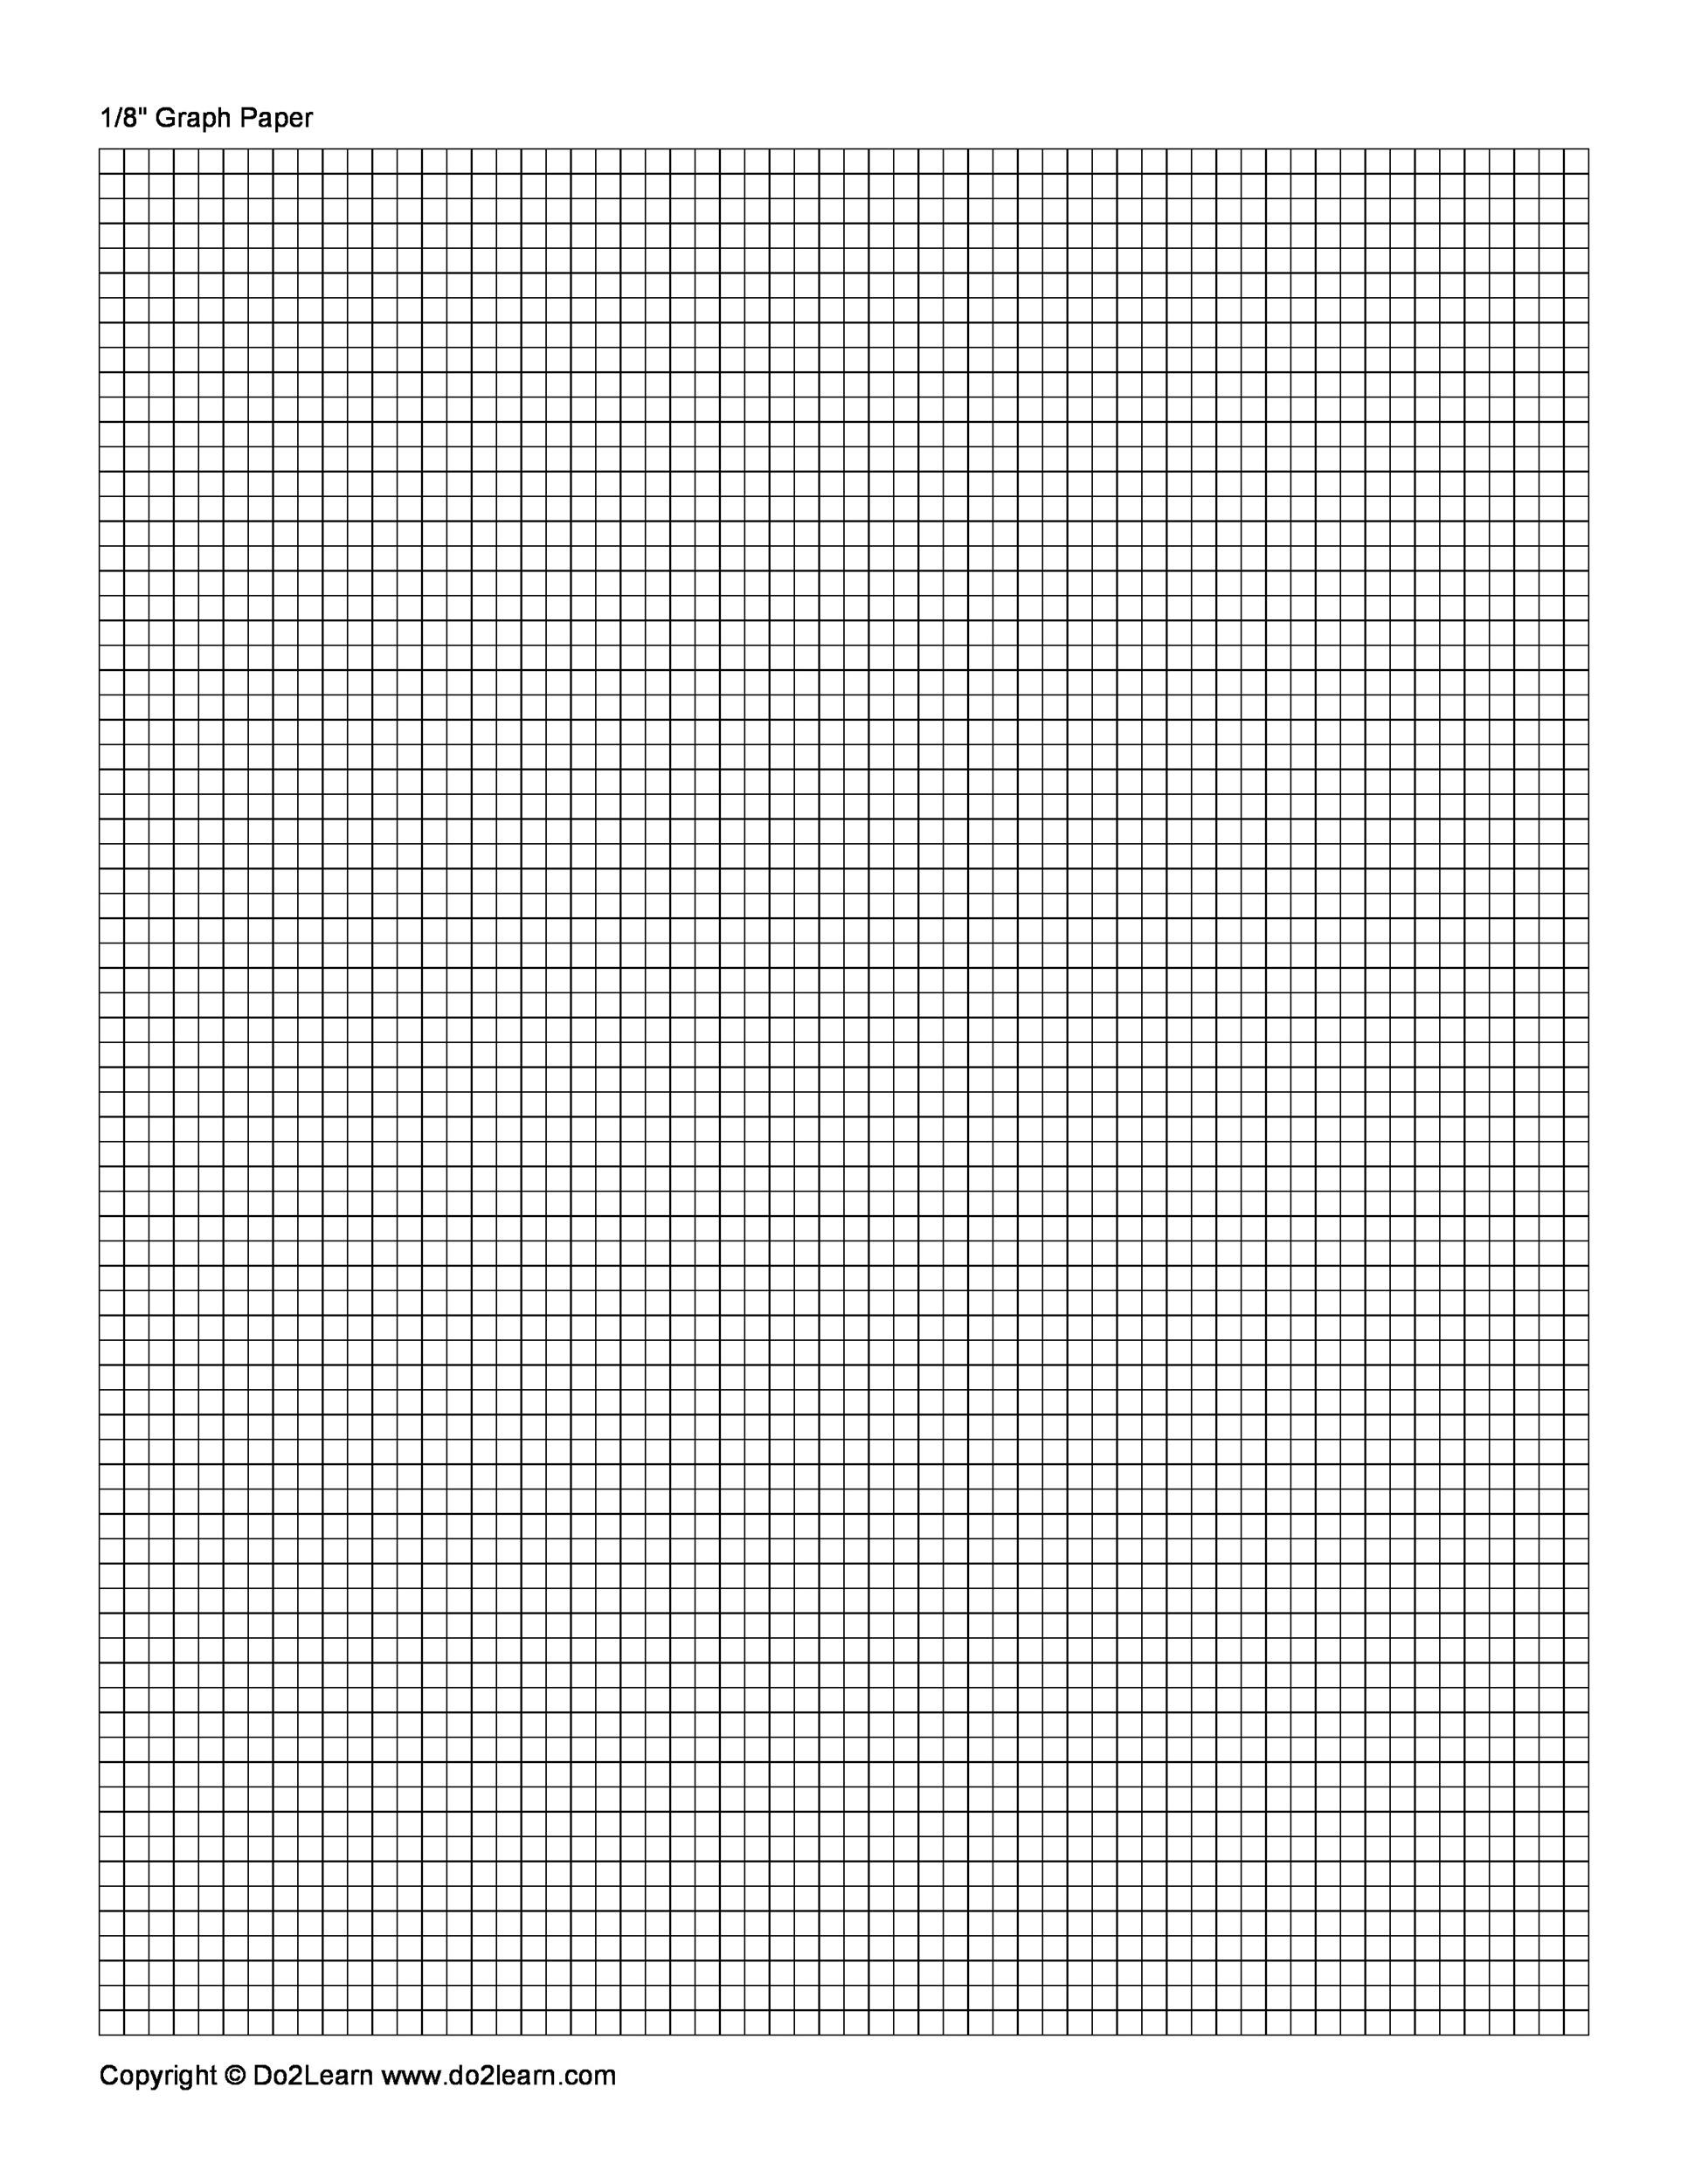 Graph Linear Equations Blank Chart  www.topsimages.com For Blank Picture Graph Template